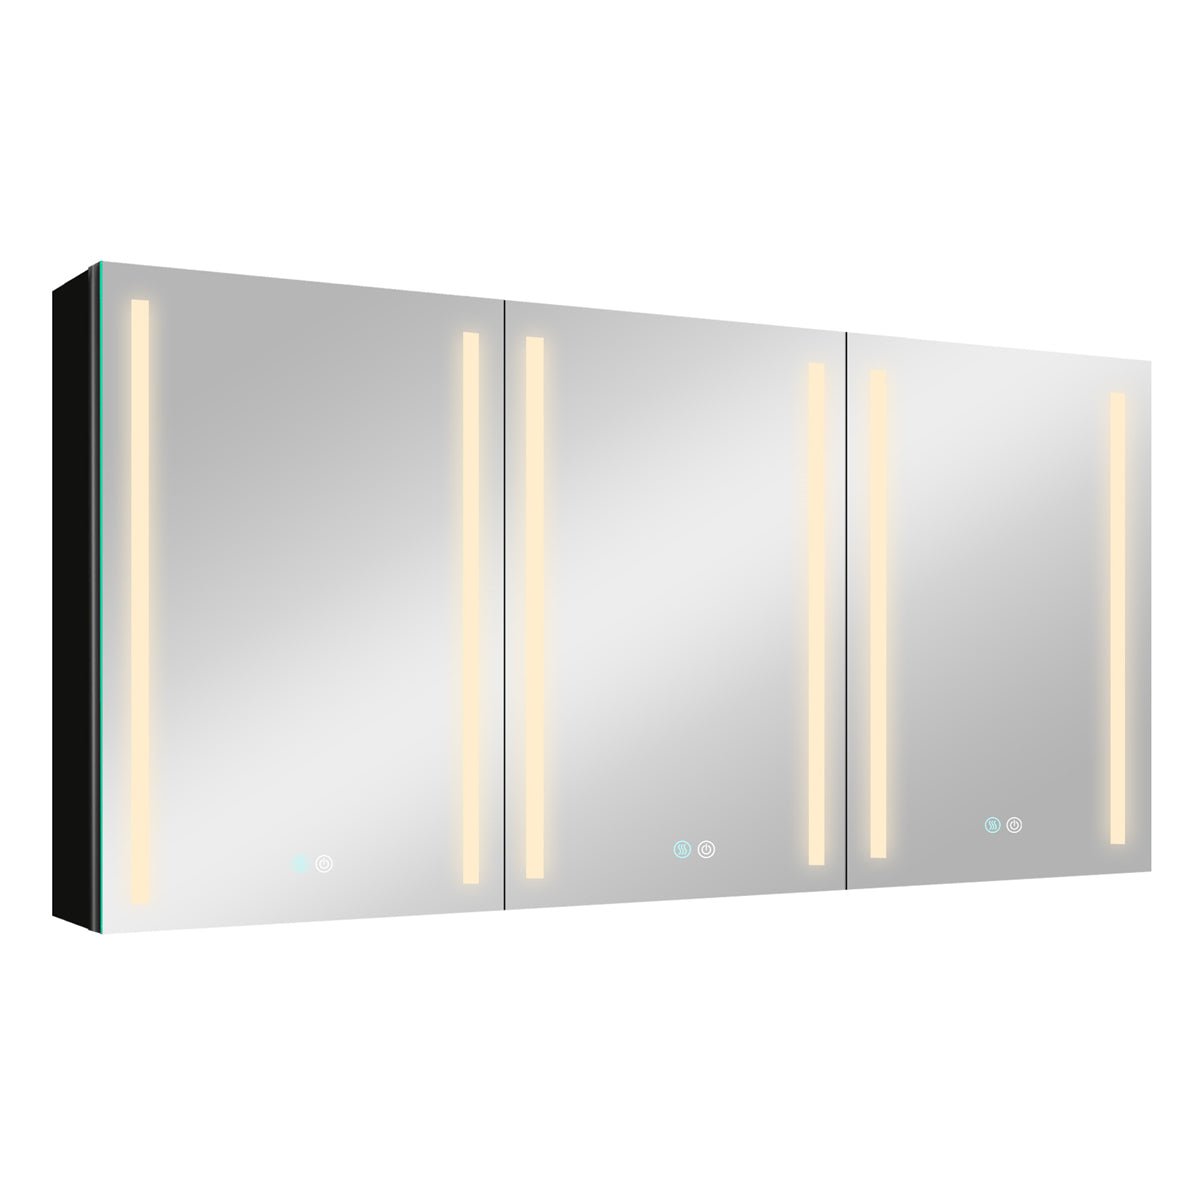 ExBrite 60 in. W x 30 in. H Bathroom Medicine Cabinet with Lighted Mirror, Surface Mount ,Stepless Dimming - ExBriteUSA